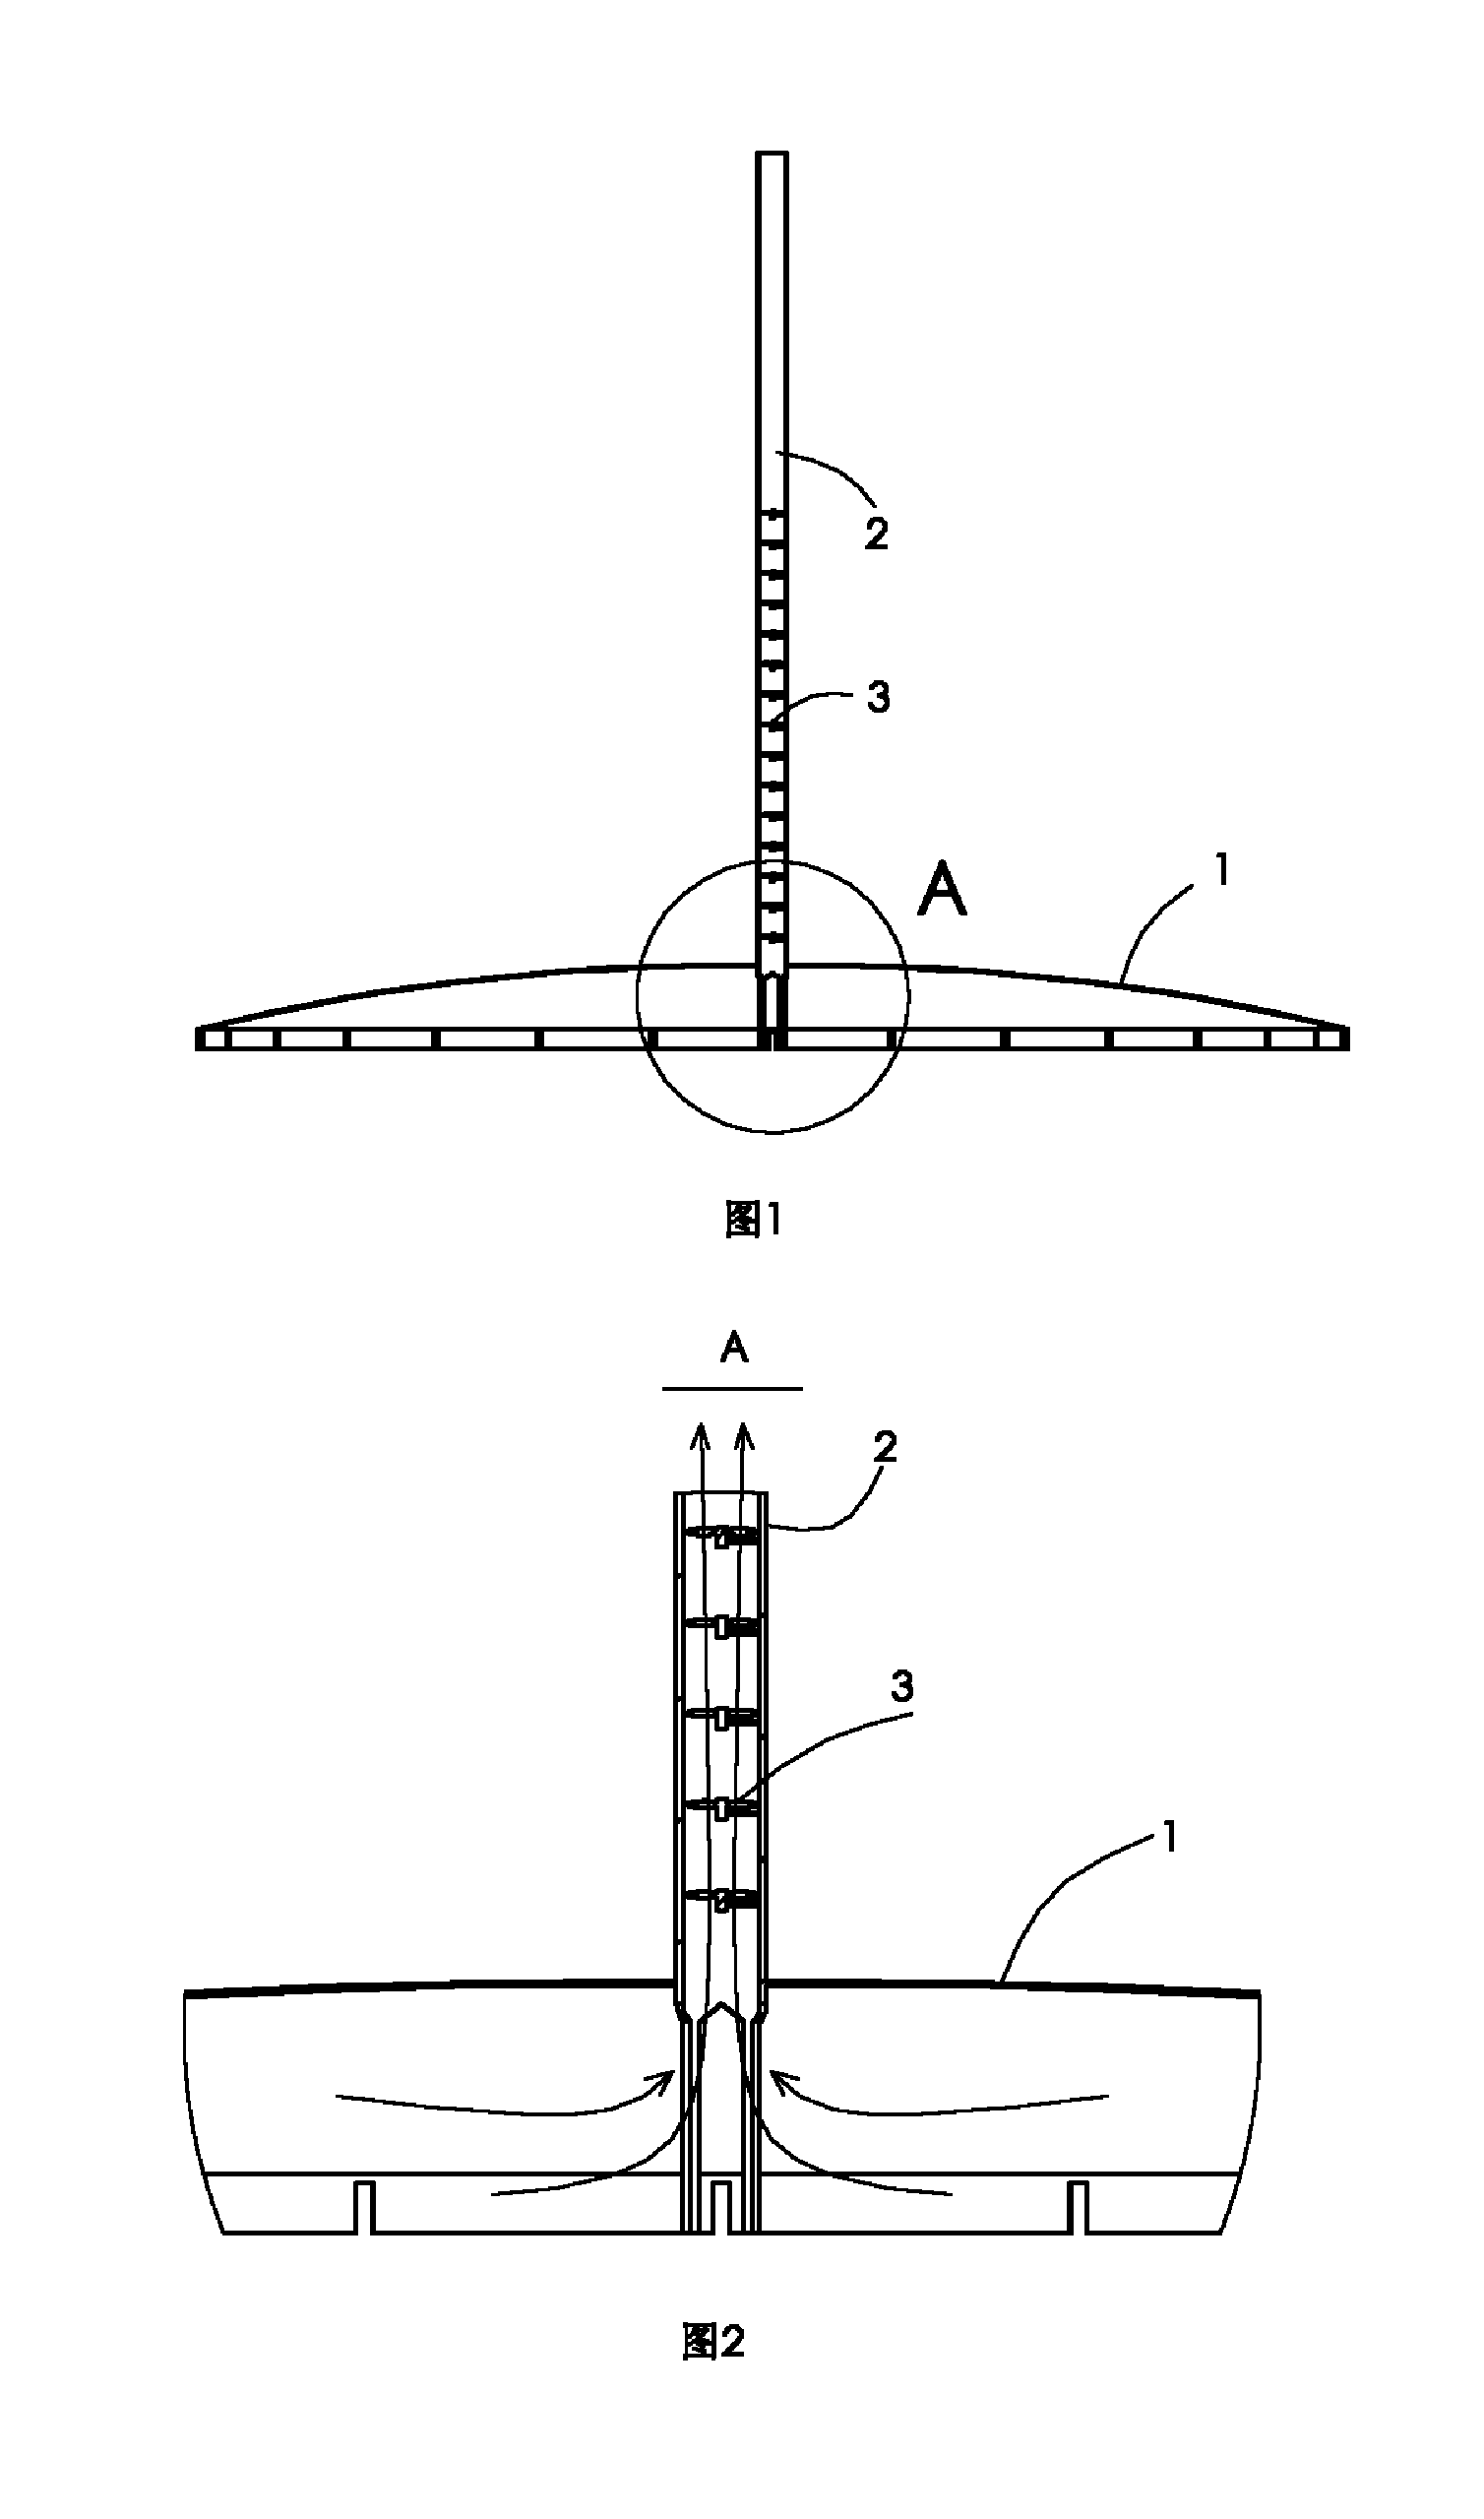 Method for sunning slat and generating power by using solar energy and wind energy